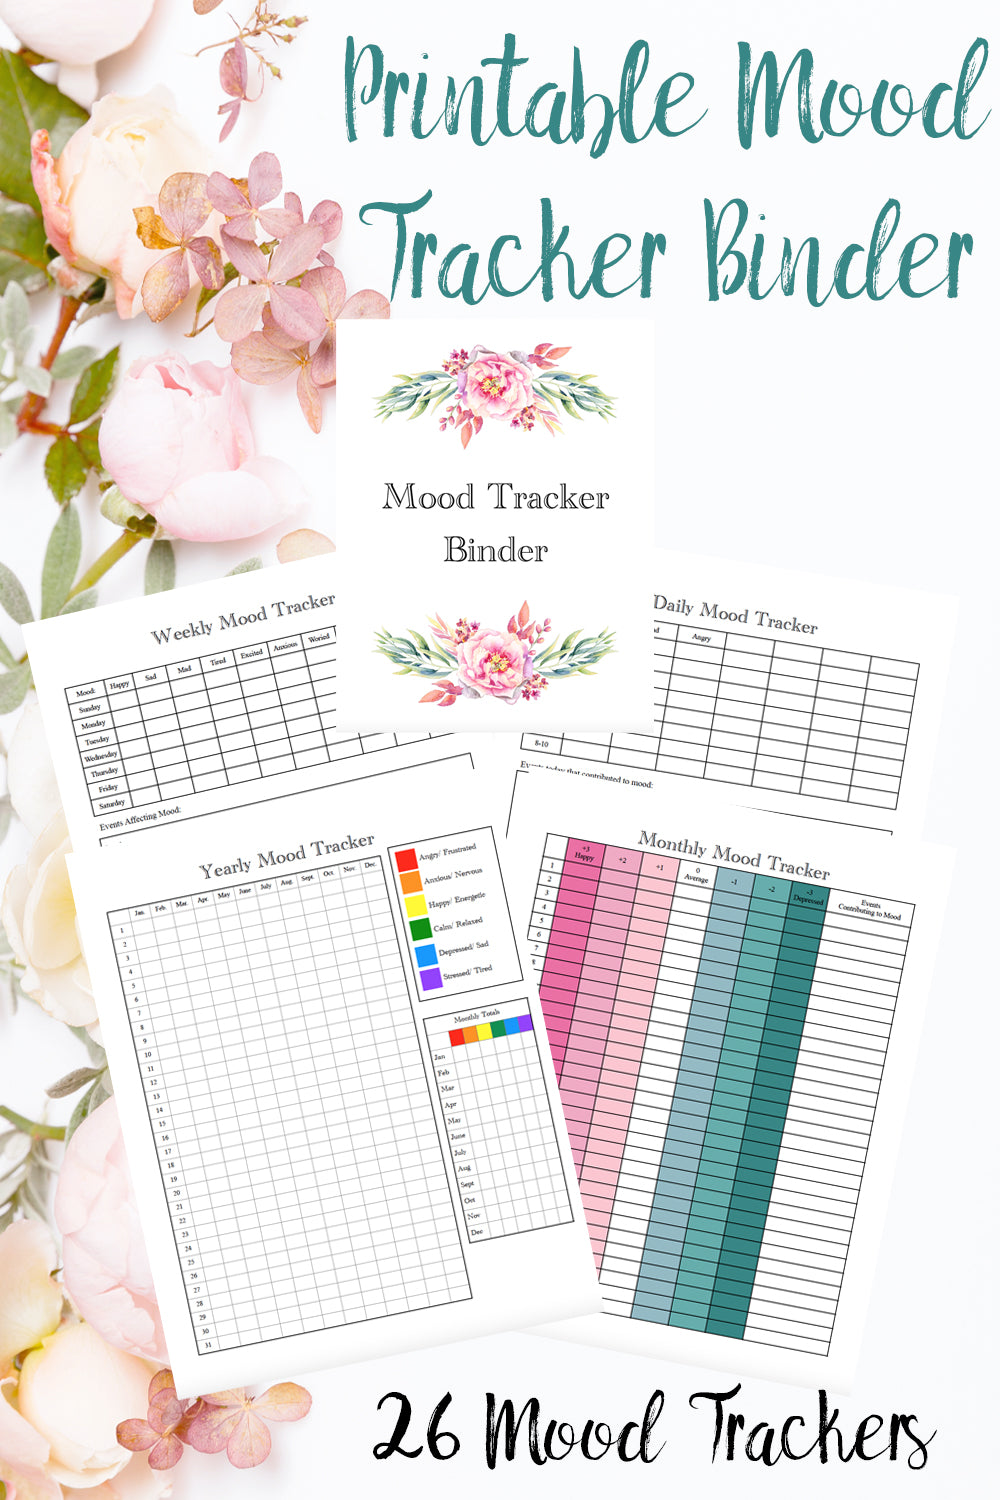 Printable mood tracker binder. 26 different mood trackers. Daily, weekly, monthly, & yearly. Monthly themed & more. 